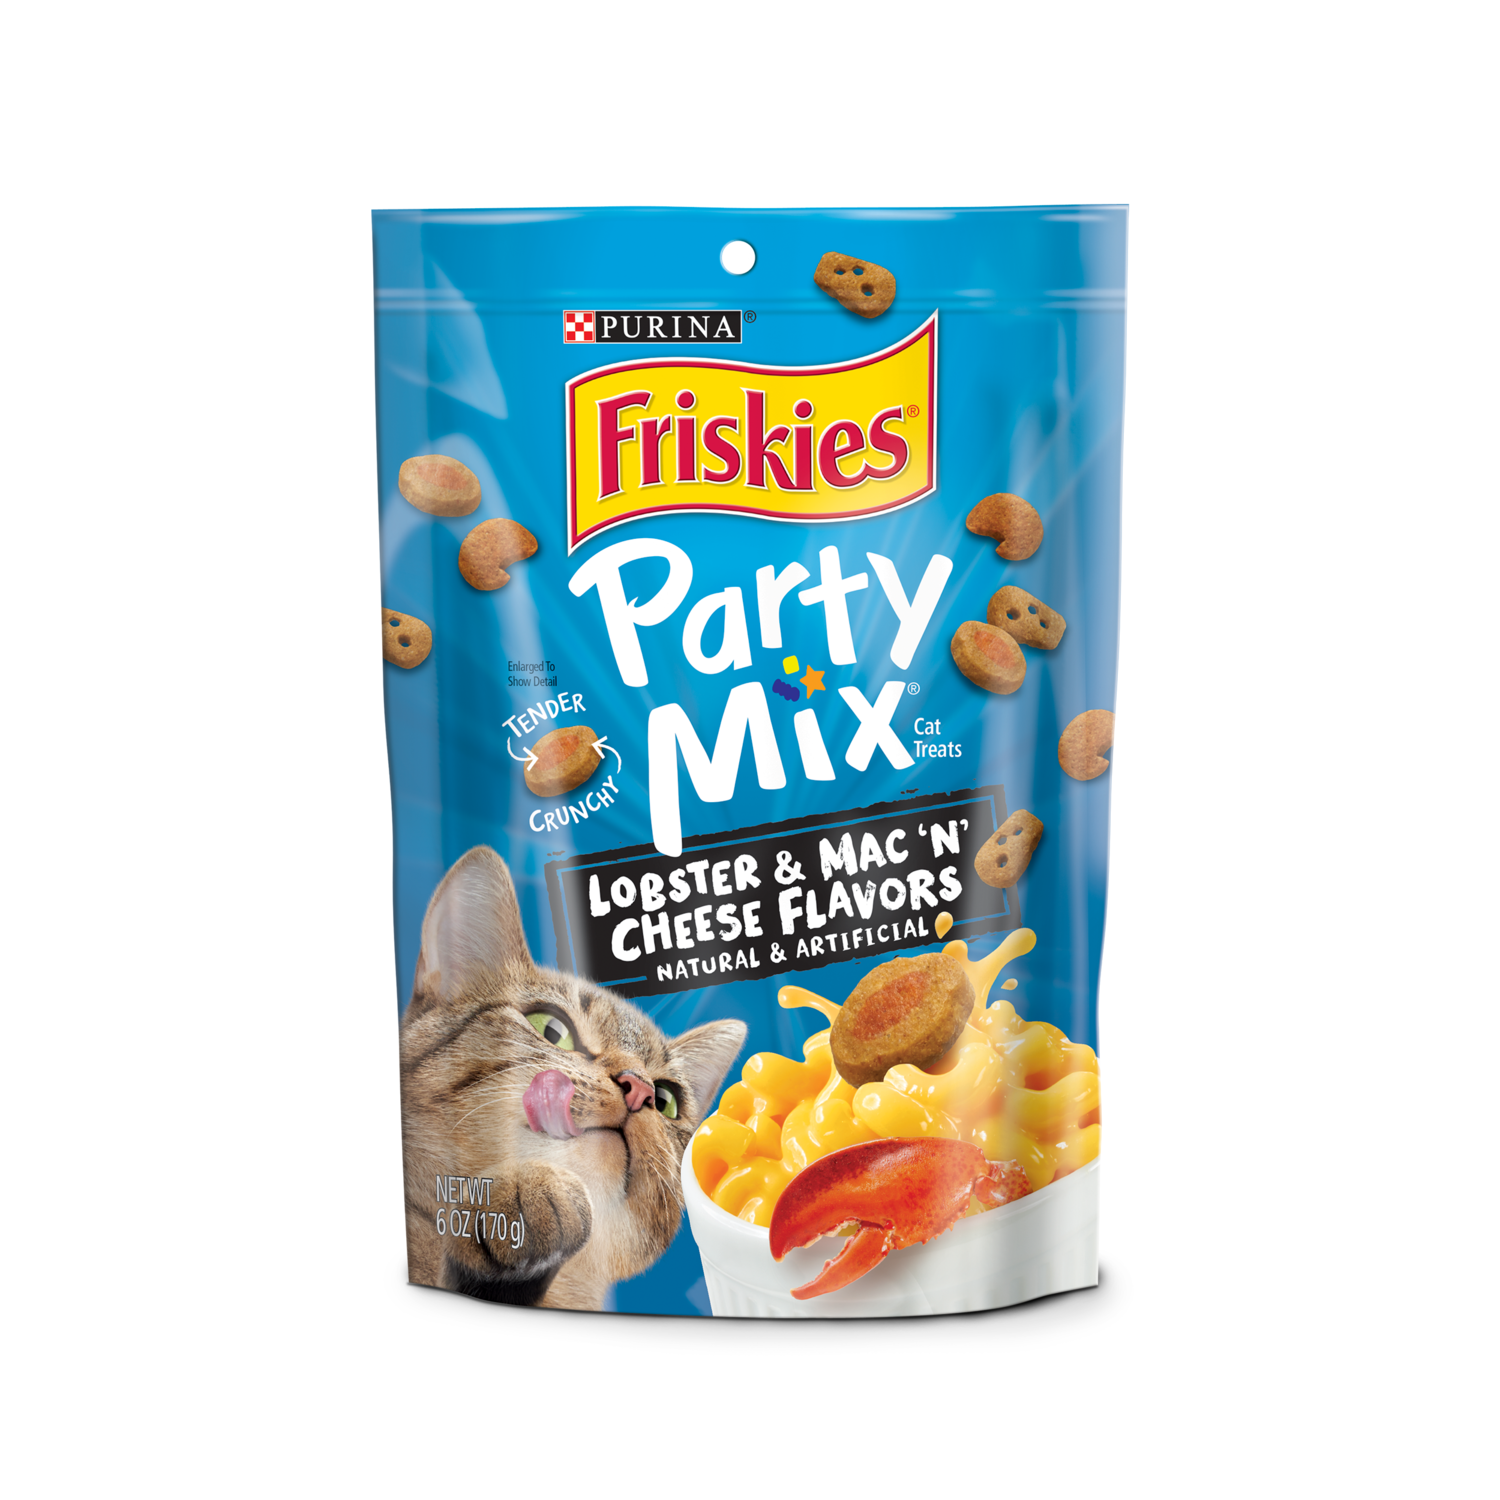 Friskies Party Mix Crunchy Lobster Mac & Cheese 6z